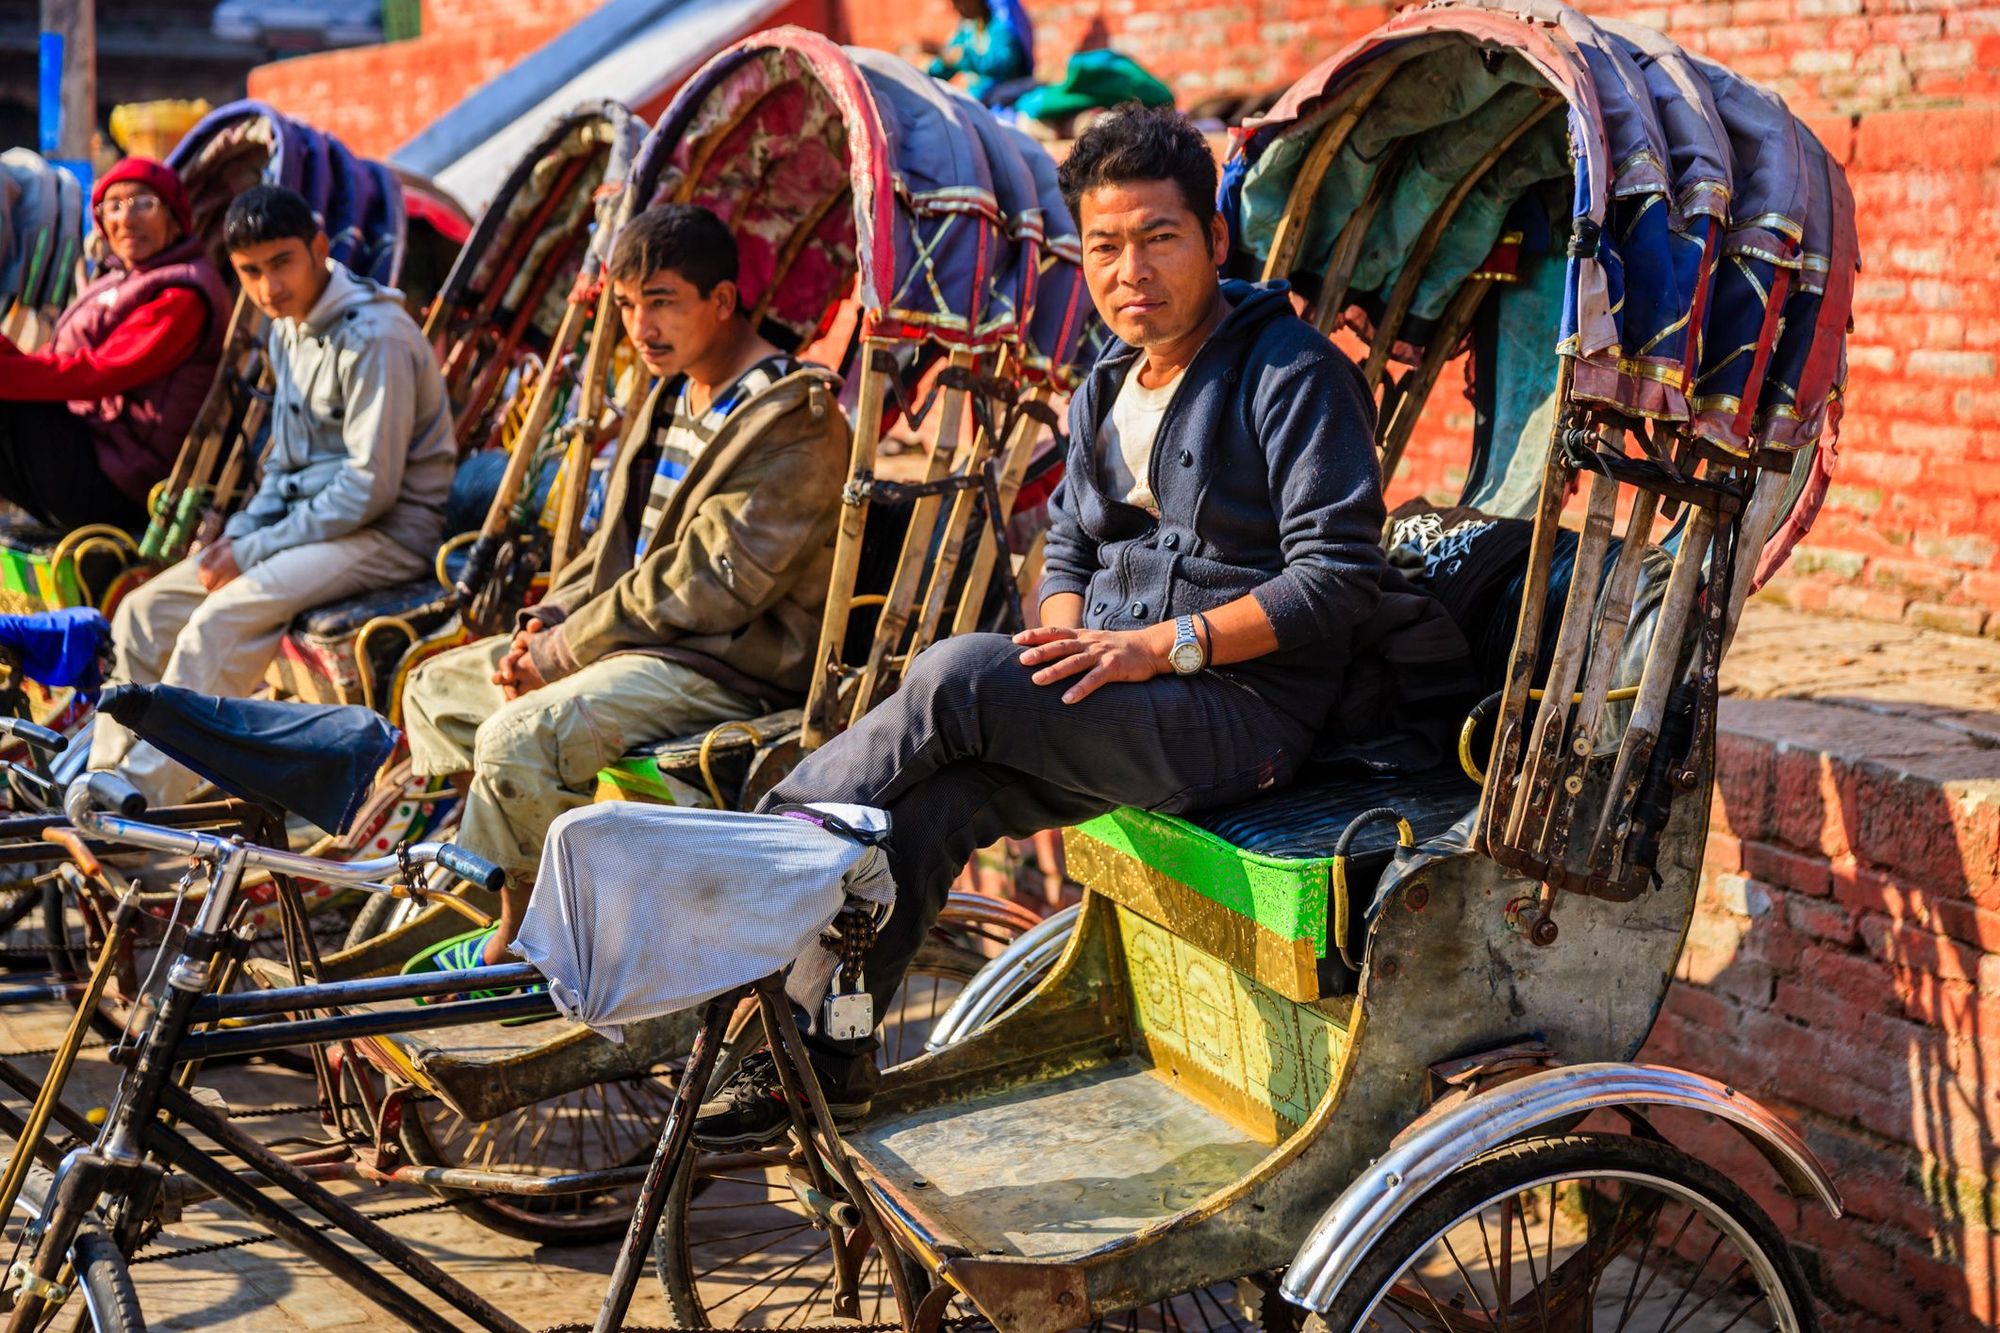 Cycle rickshaw drivers waiting for passengers. Photo: Getty.